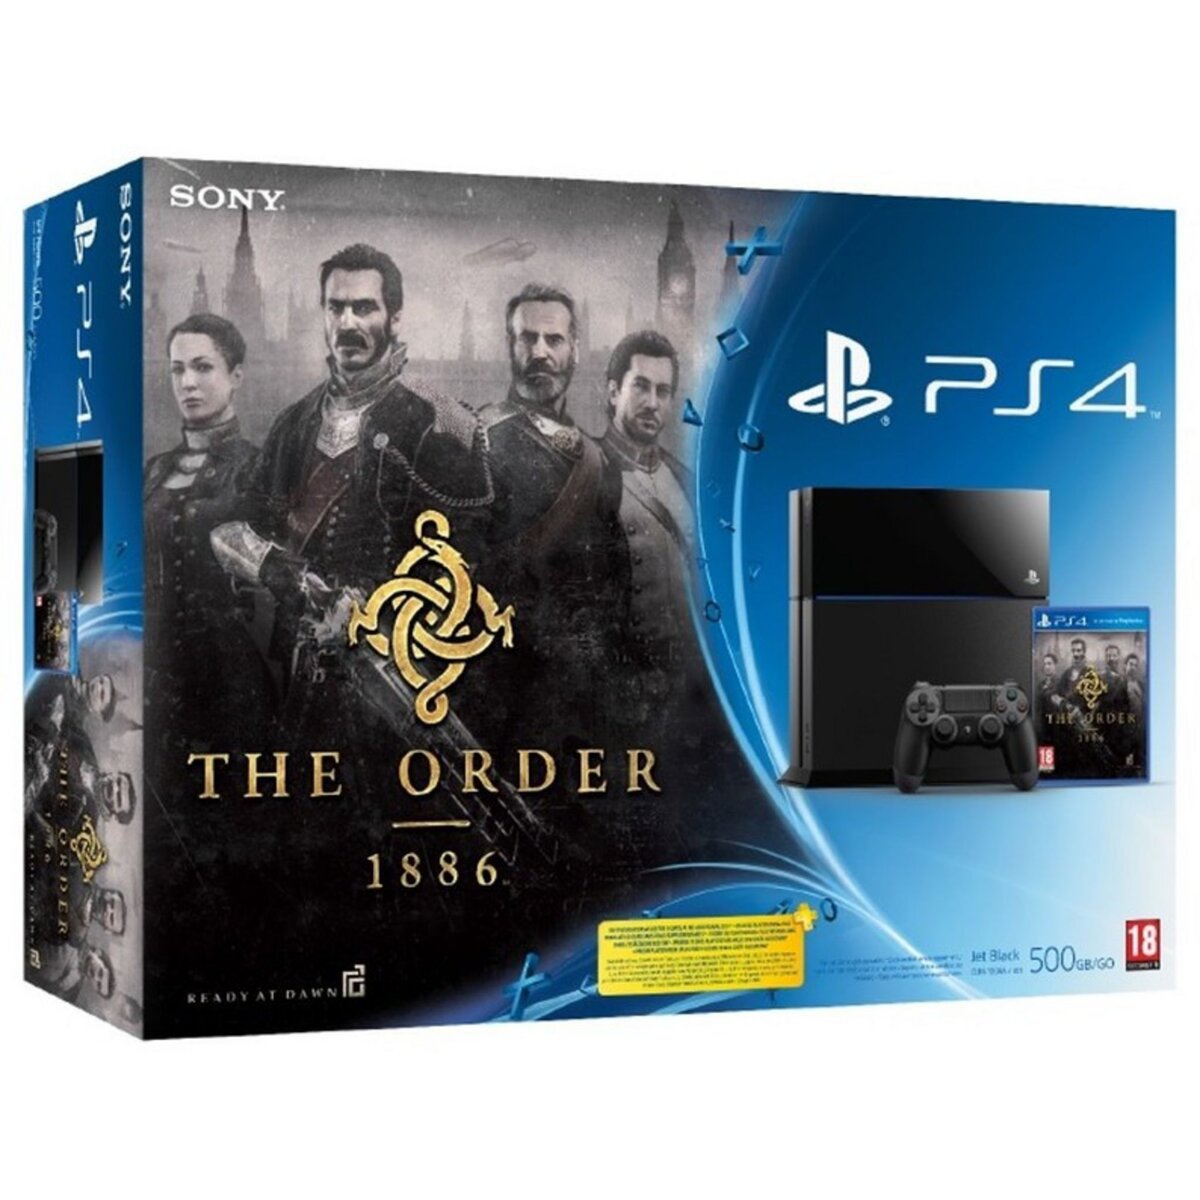 SONY Logiciel Console PS4 500 Go + Jeu The Order 1886